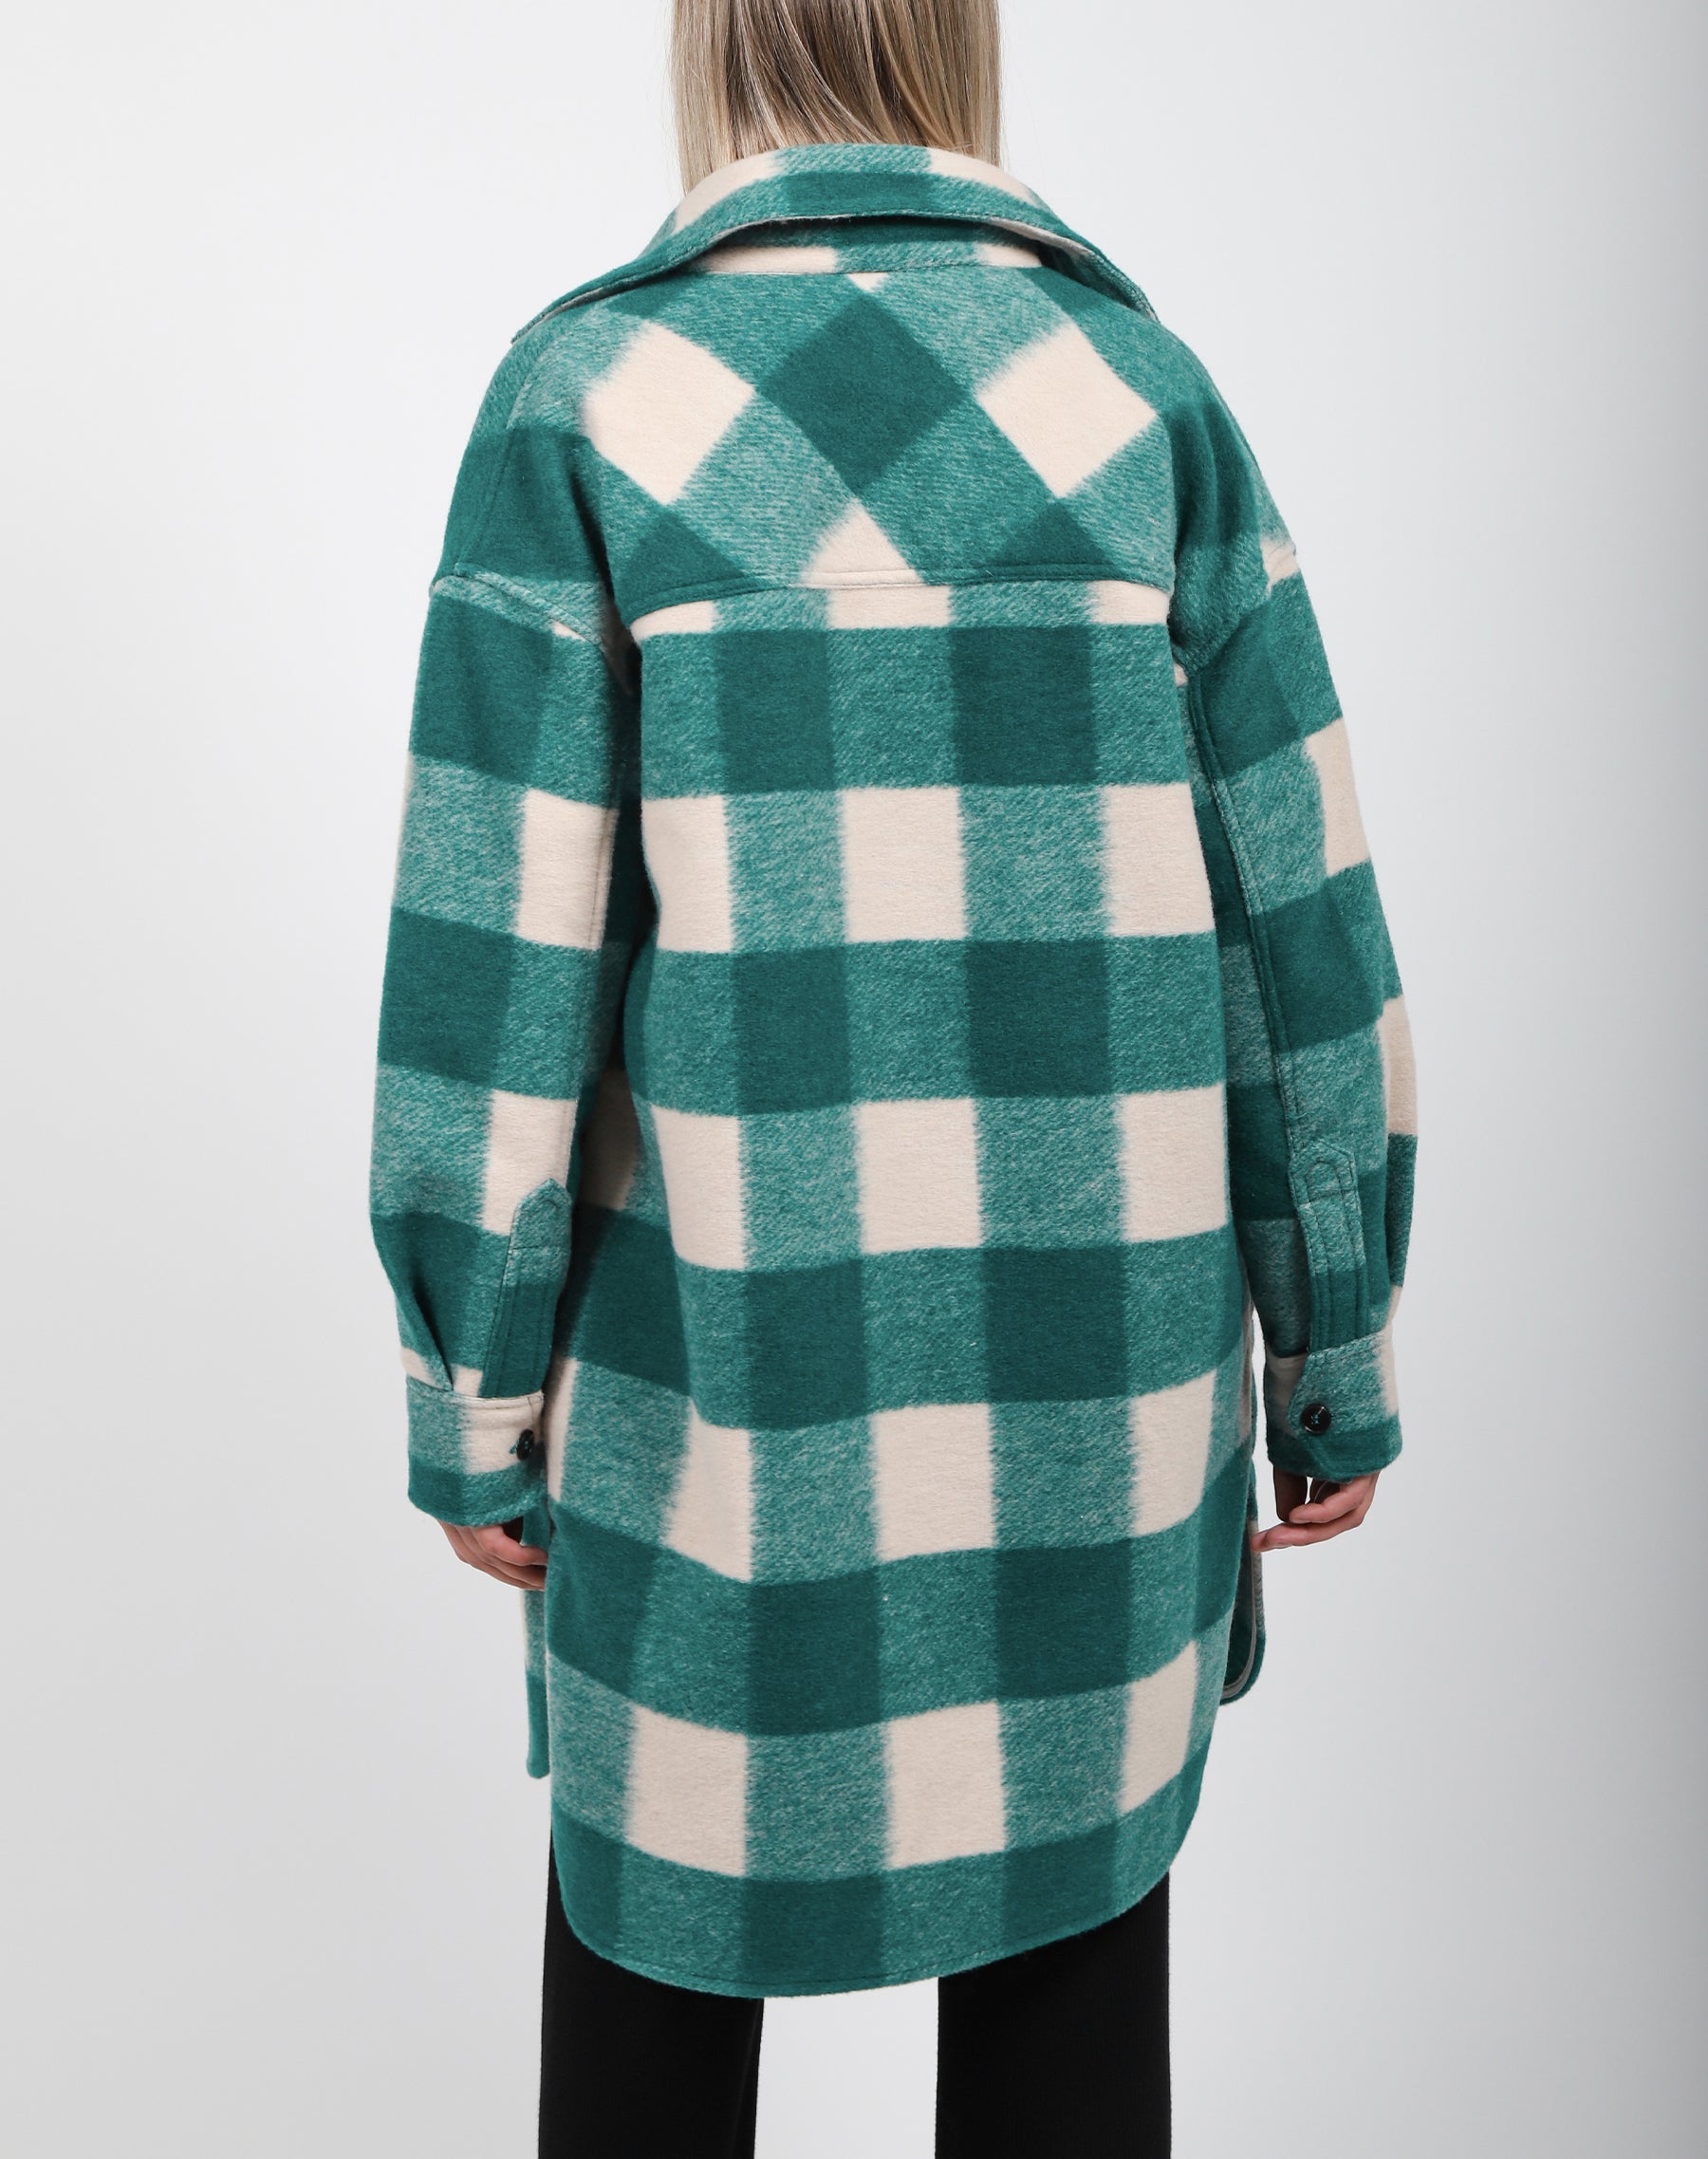 The Plaid Jacket | Emerald and Cream